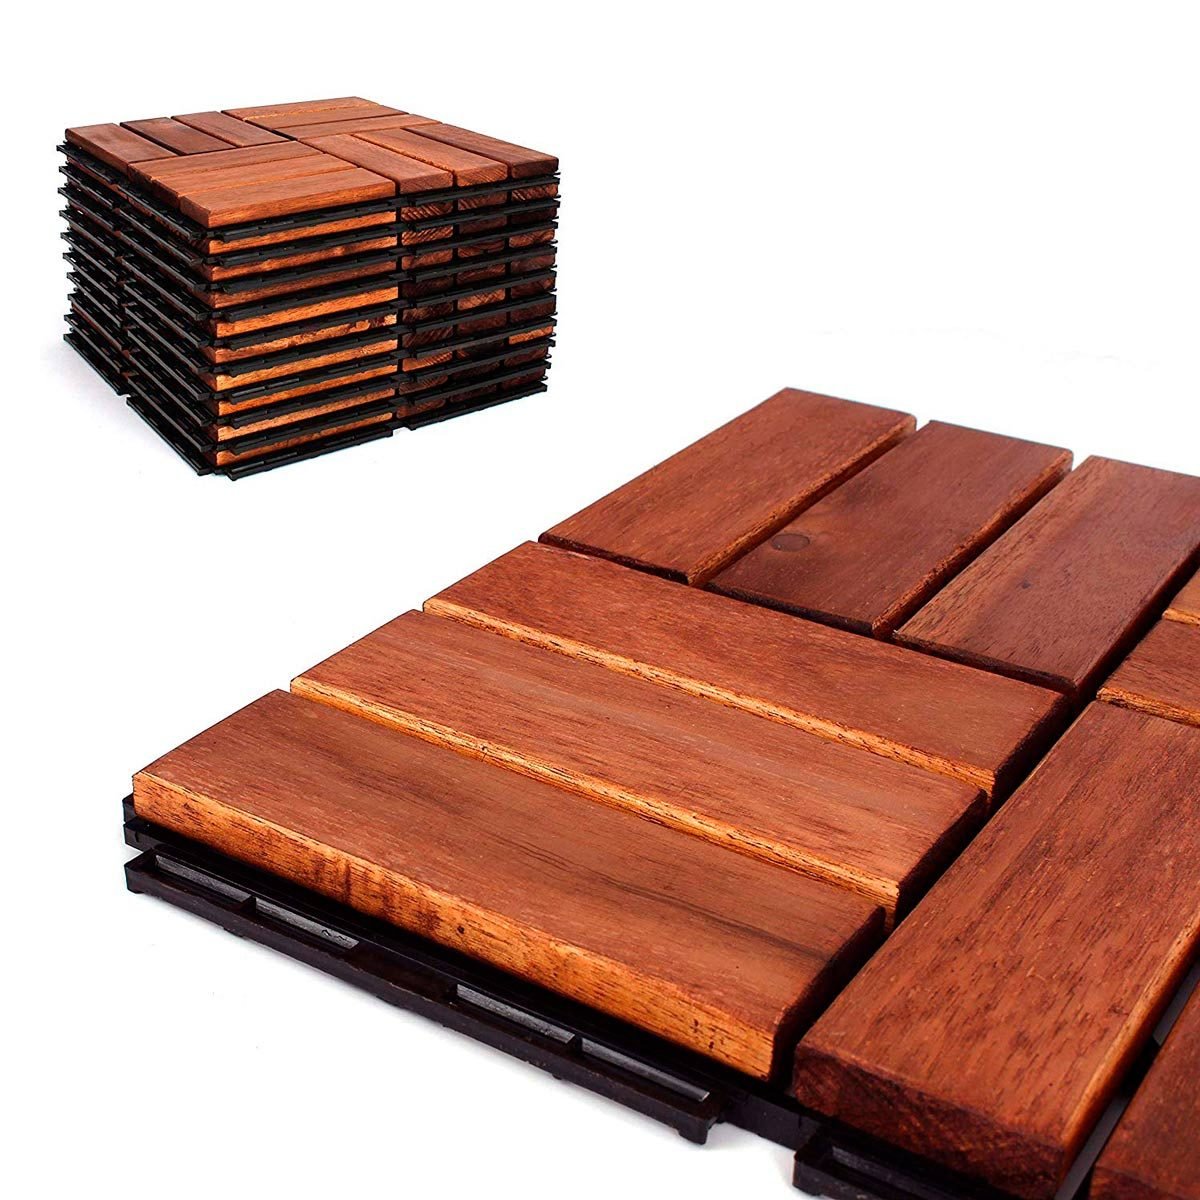 Wood Deck Tiles Everything You Need